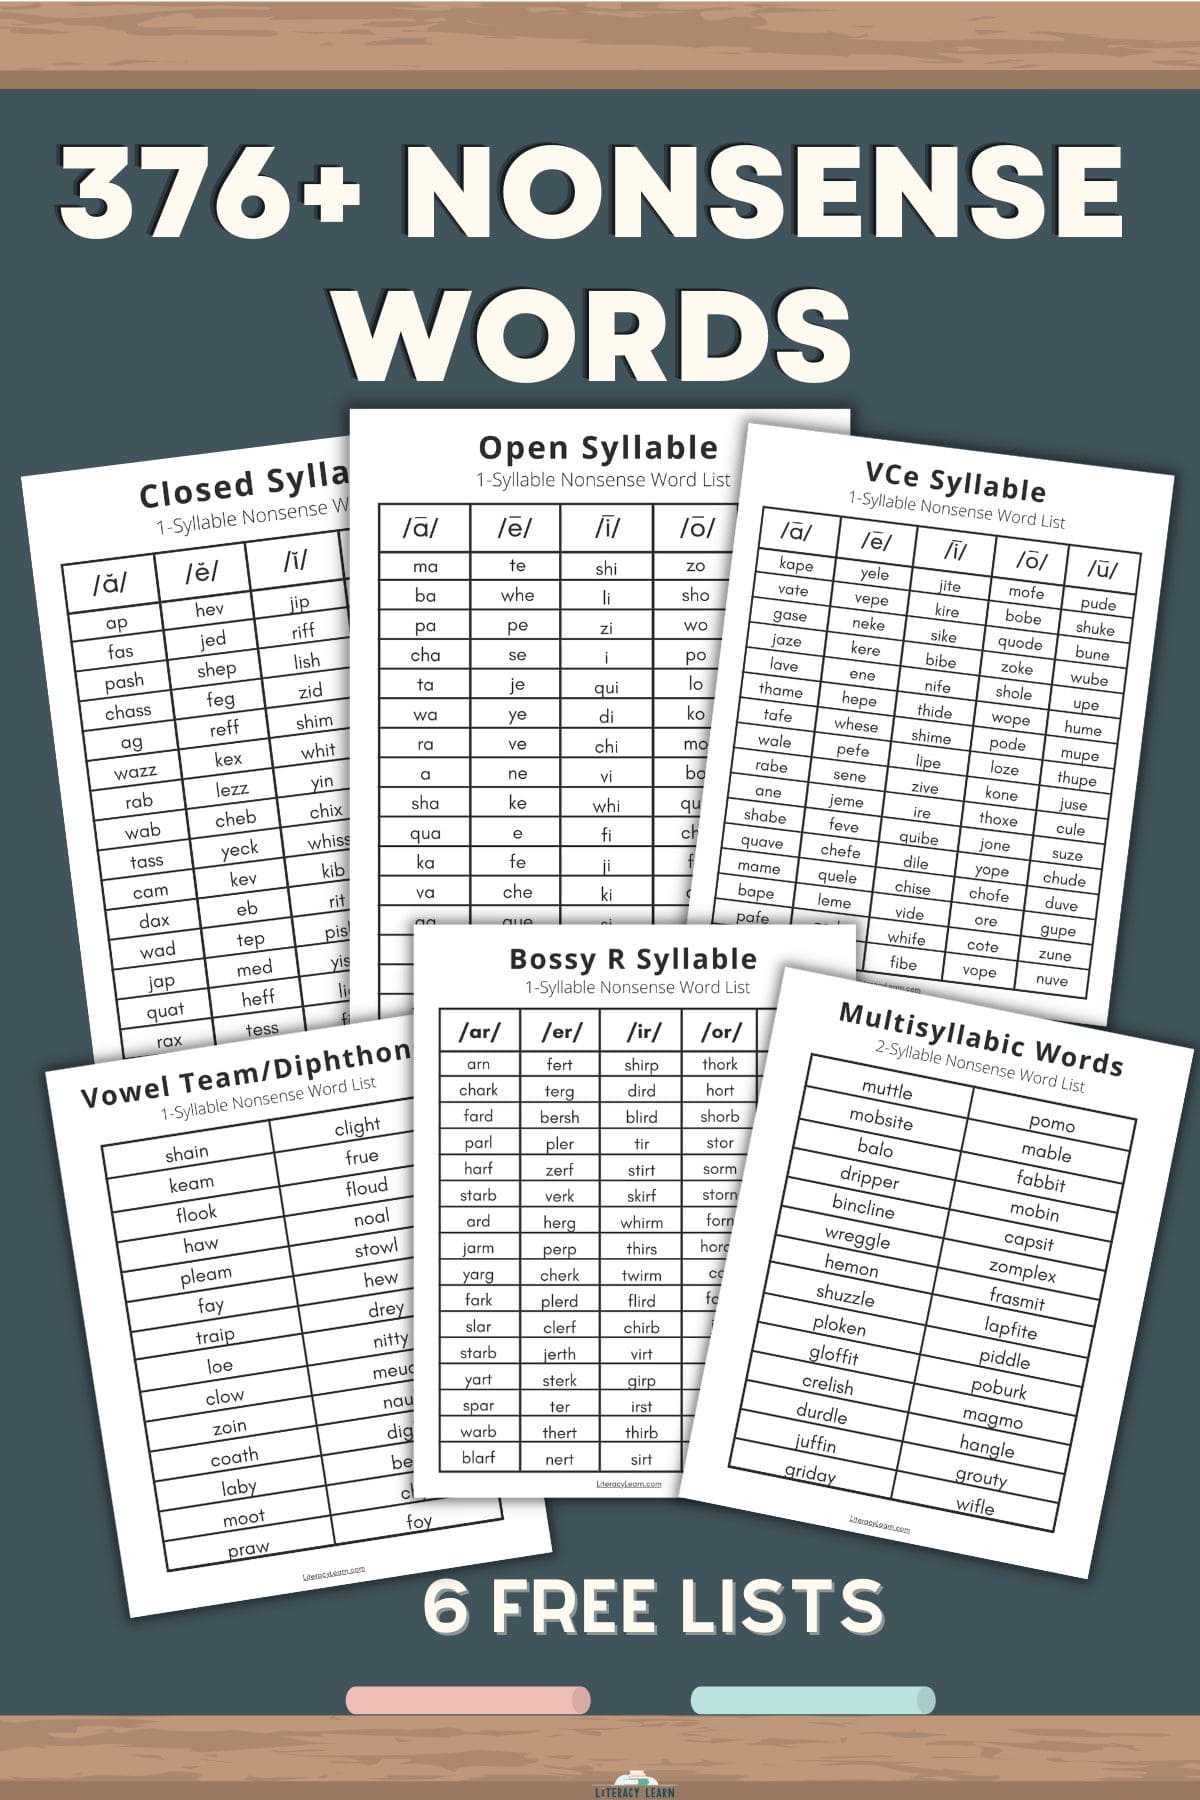 376-nonsense-words-pseudowords-6-free-lists-literacy-learn